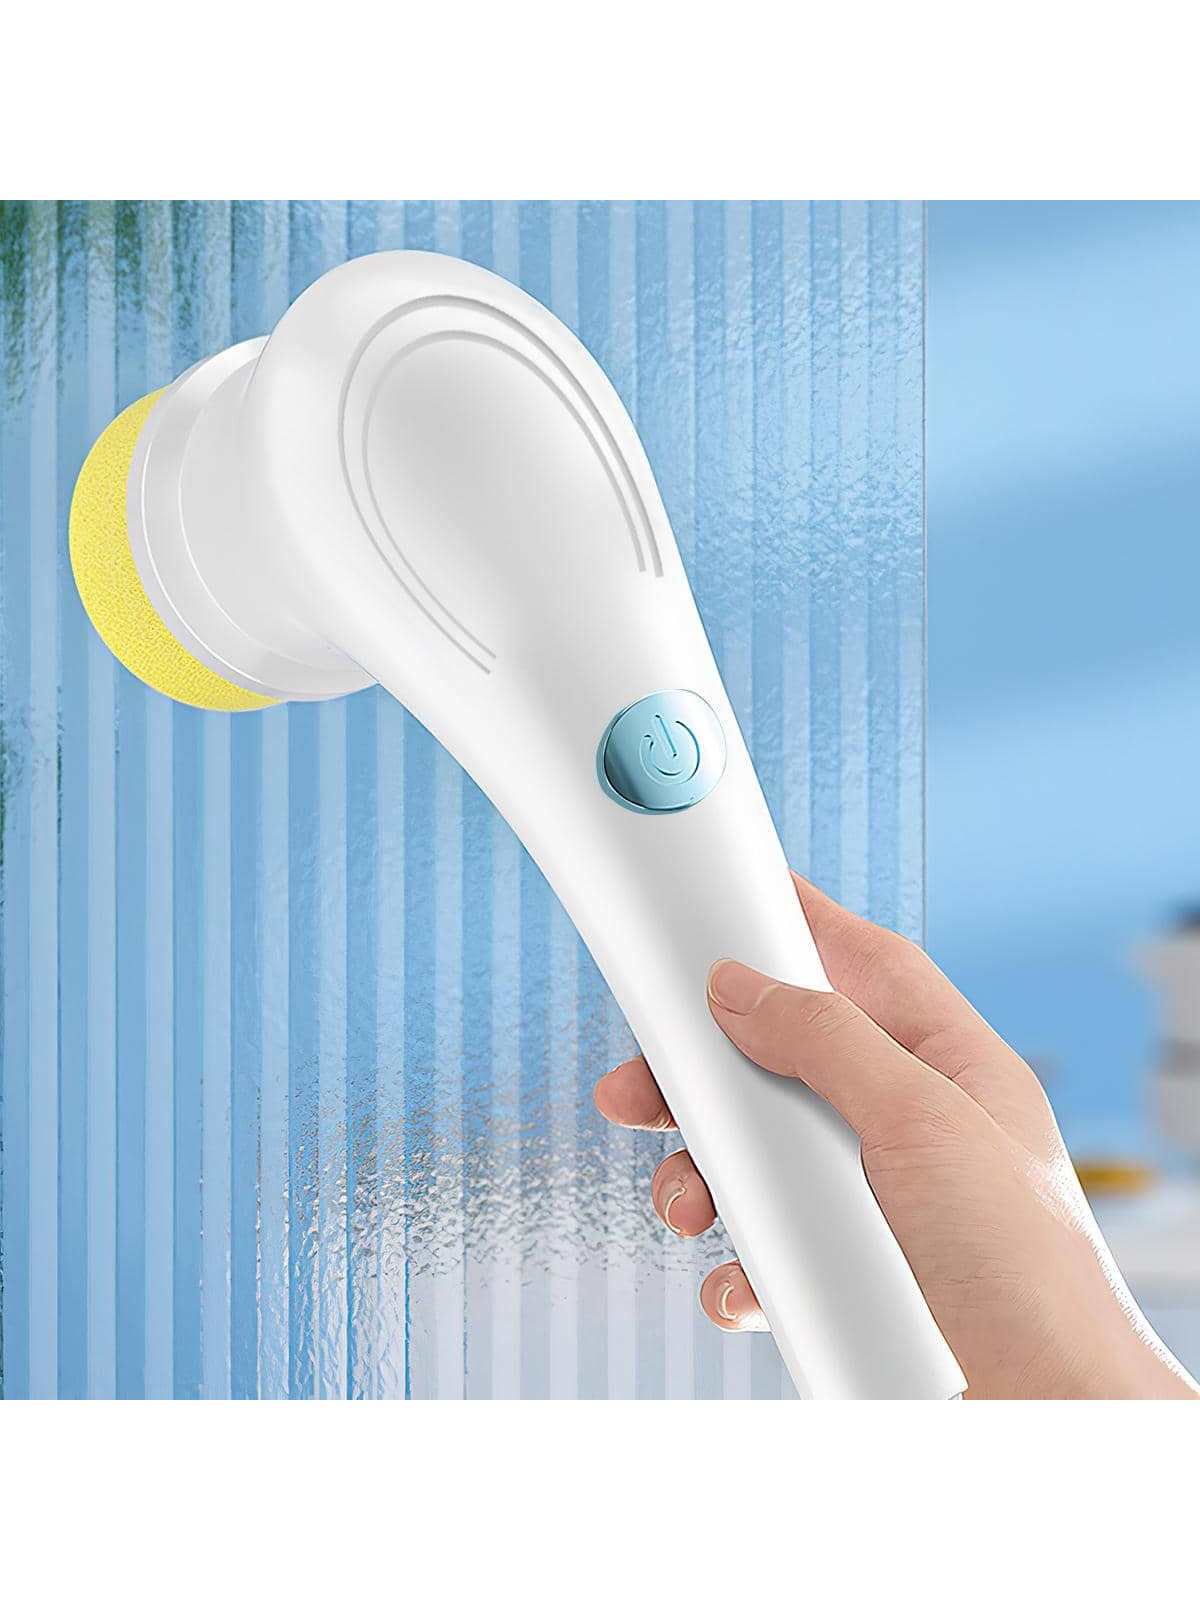 1pc Plastic Electric Cleaning Brush, Modern 5 In 1 Cleaning Brush For Kitchen, Household